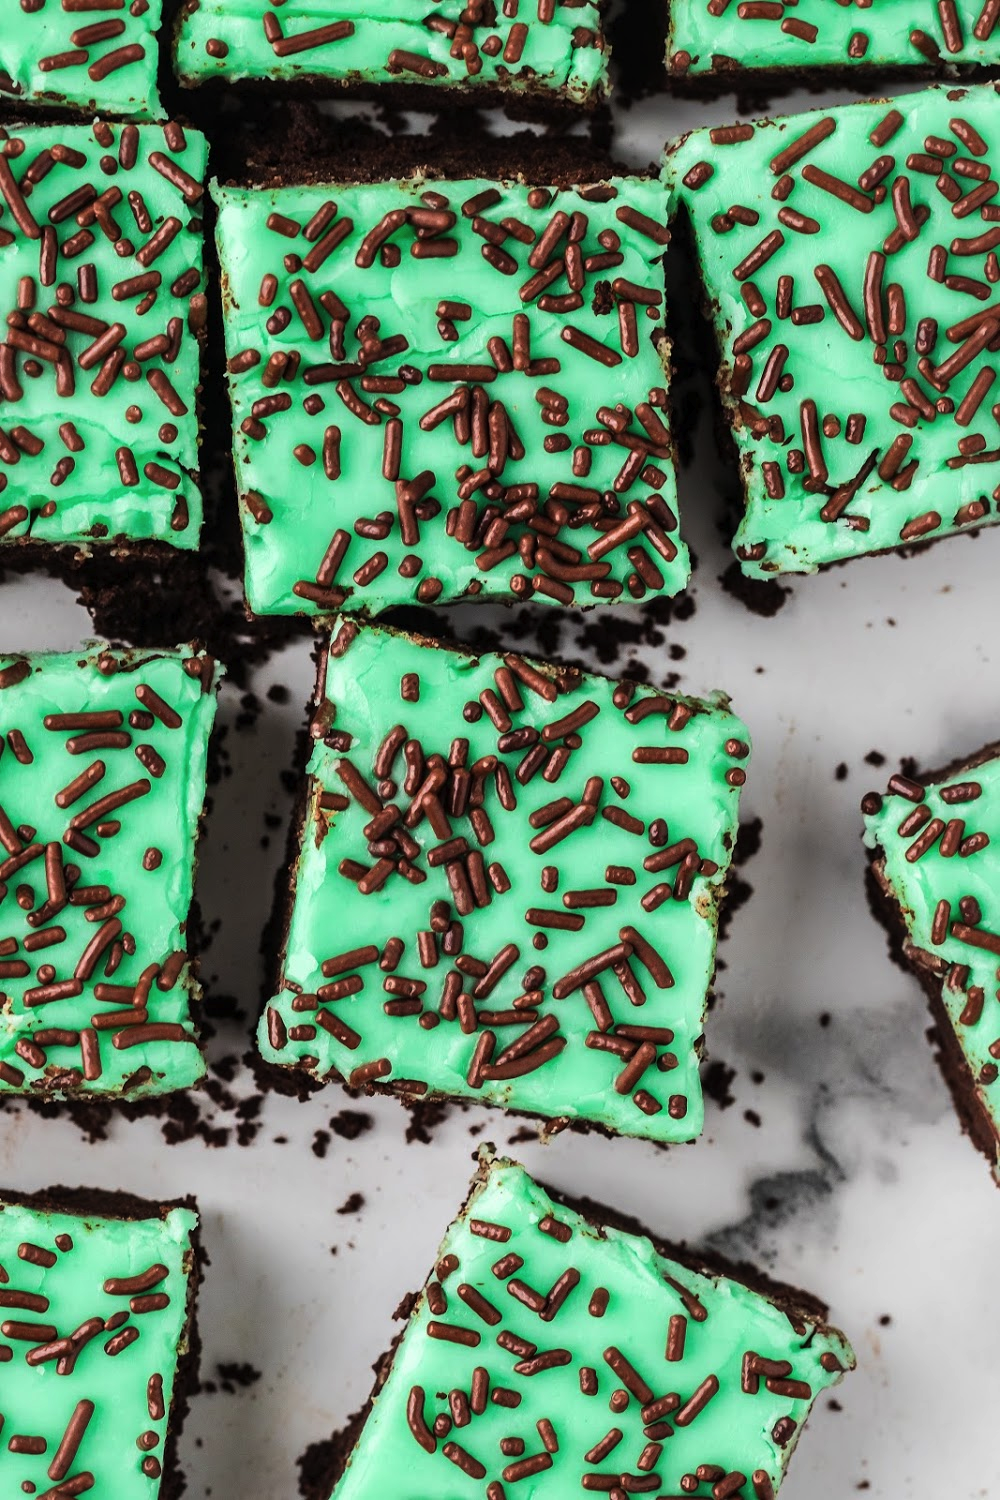 Chocolate Mint Bars with Chocolate Sprinkles